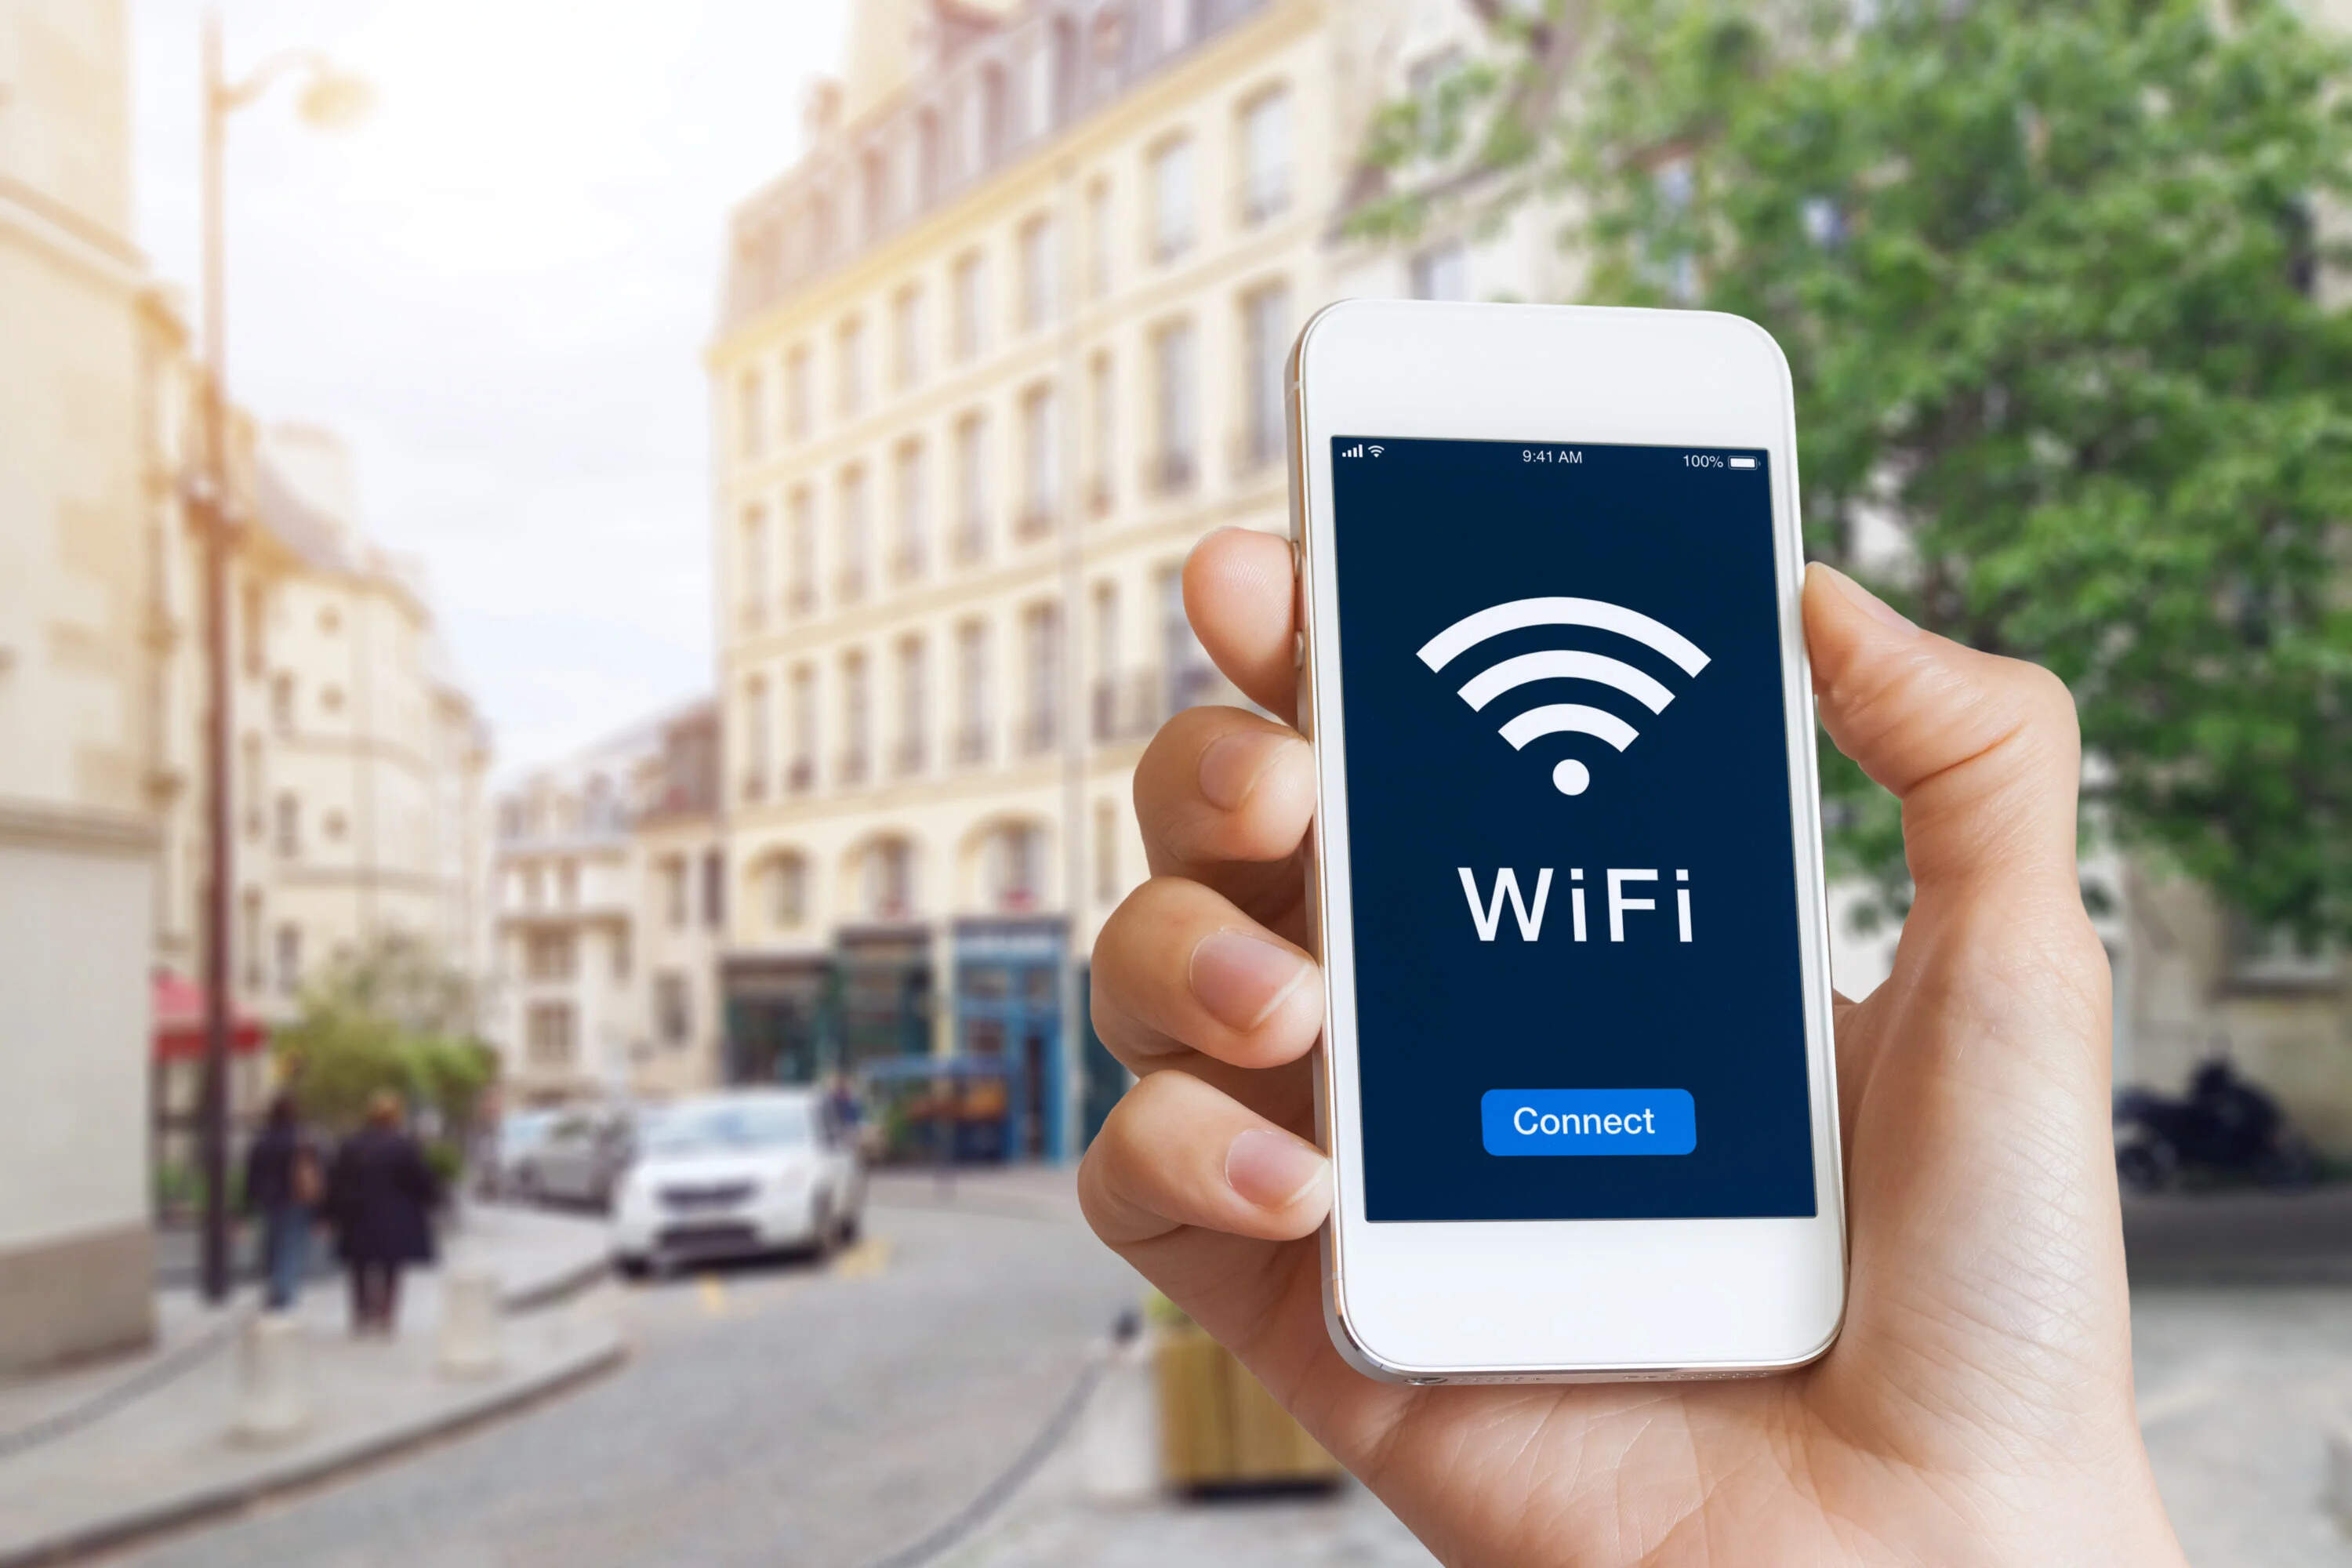 Finding And Using Wi-Fi Hotspots